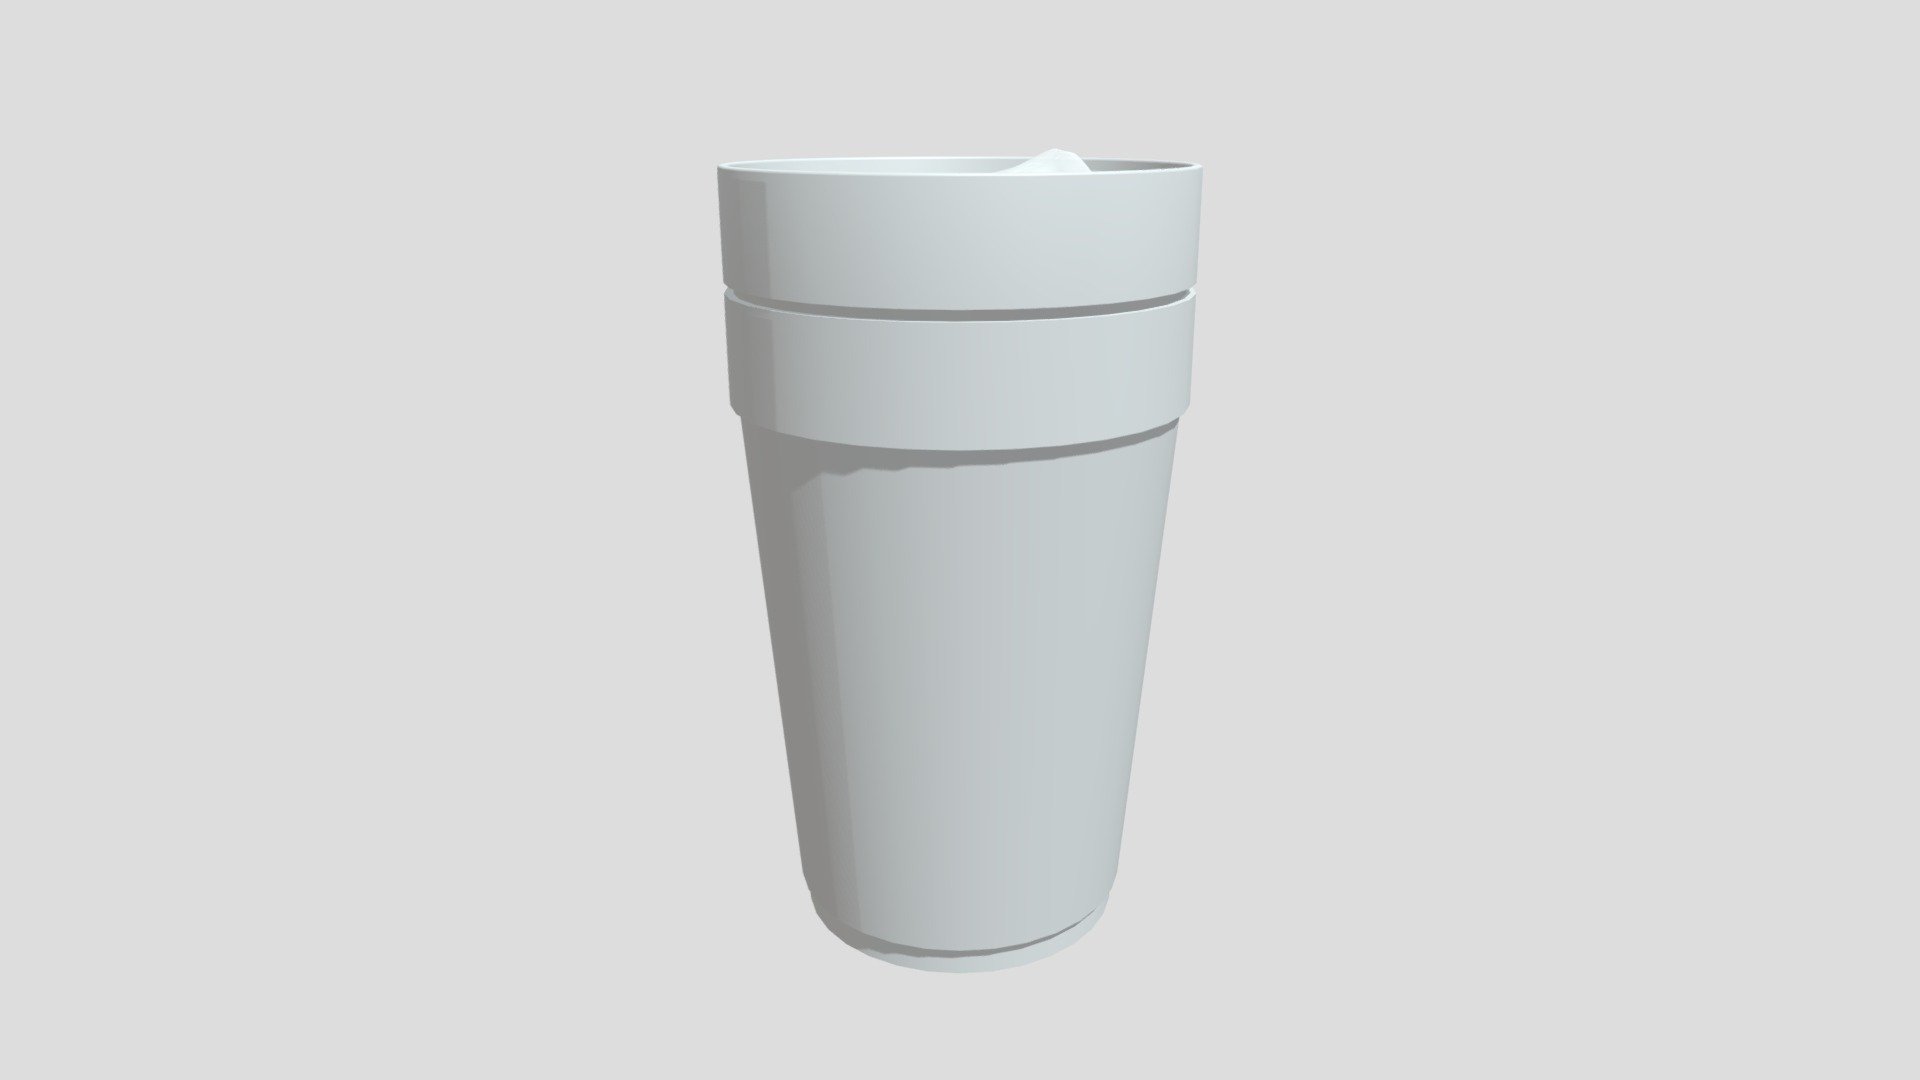 Lean double cup with ice cubes. Realistic styrofoam textured cup. Two seperate cups (not merged).
Realistic lean and ice cube textures.
Perfect for Yeat style music videos, as a background prop.

made in blender 3d model